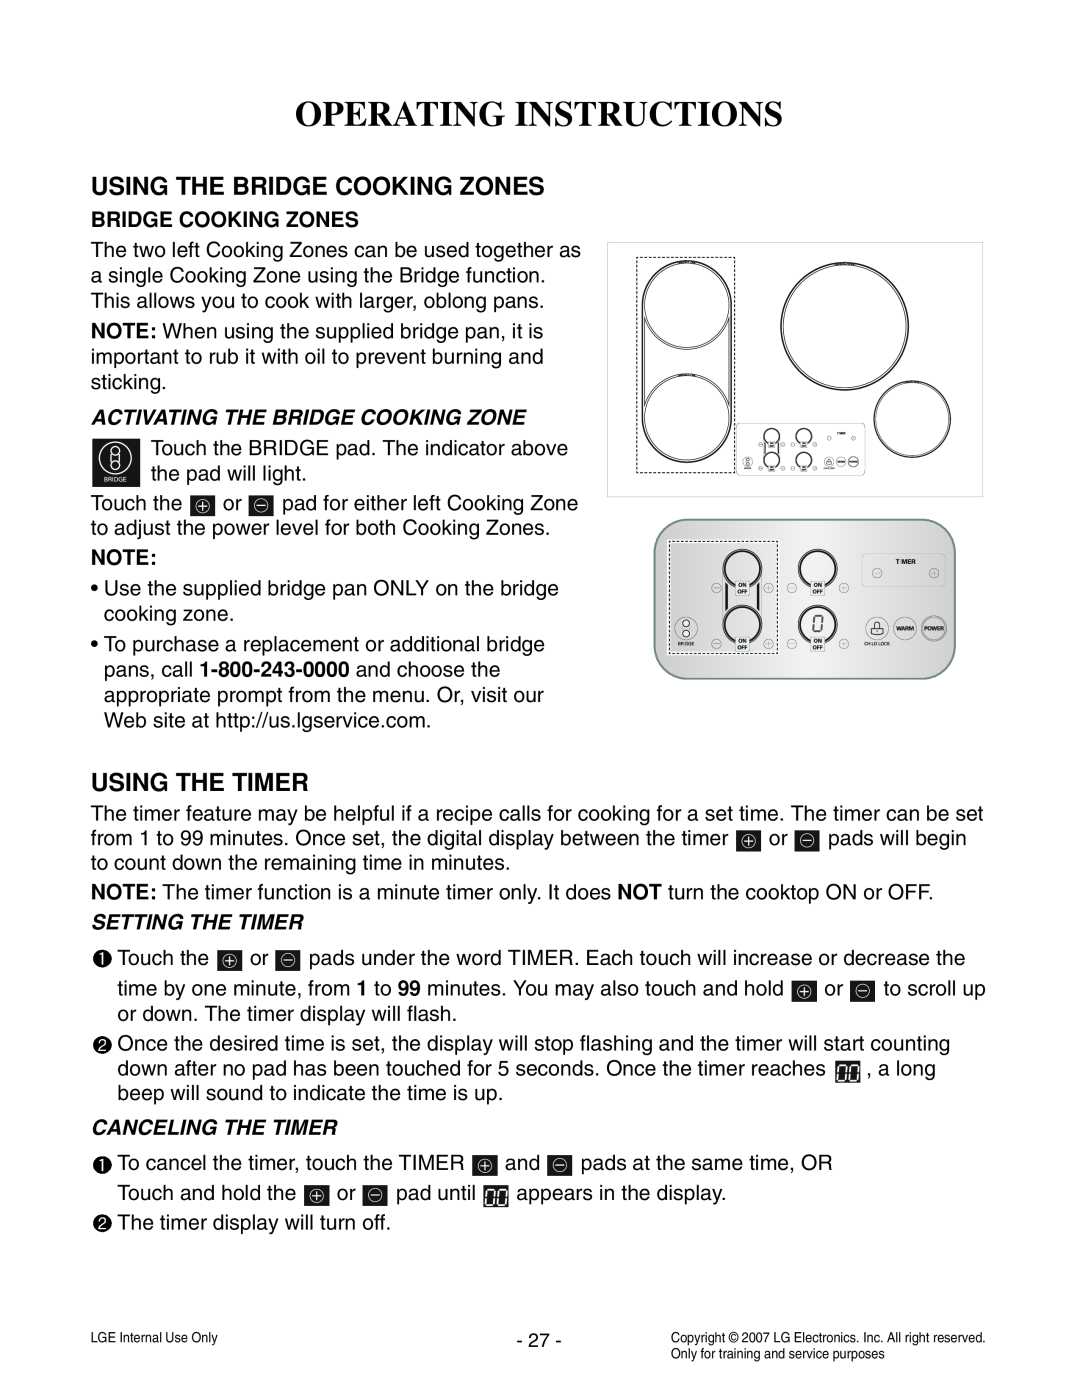 LG Electronics LCE30845 service manual Operating Instructions, Bridge Cooking Zones, Activating The Bridge Cooking Zone 